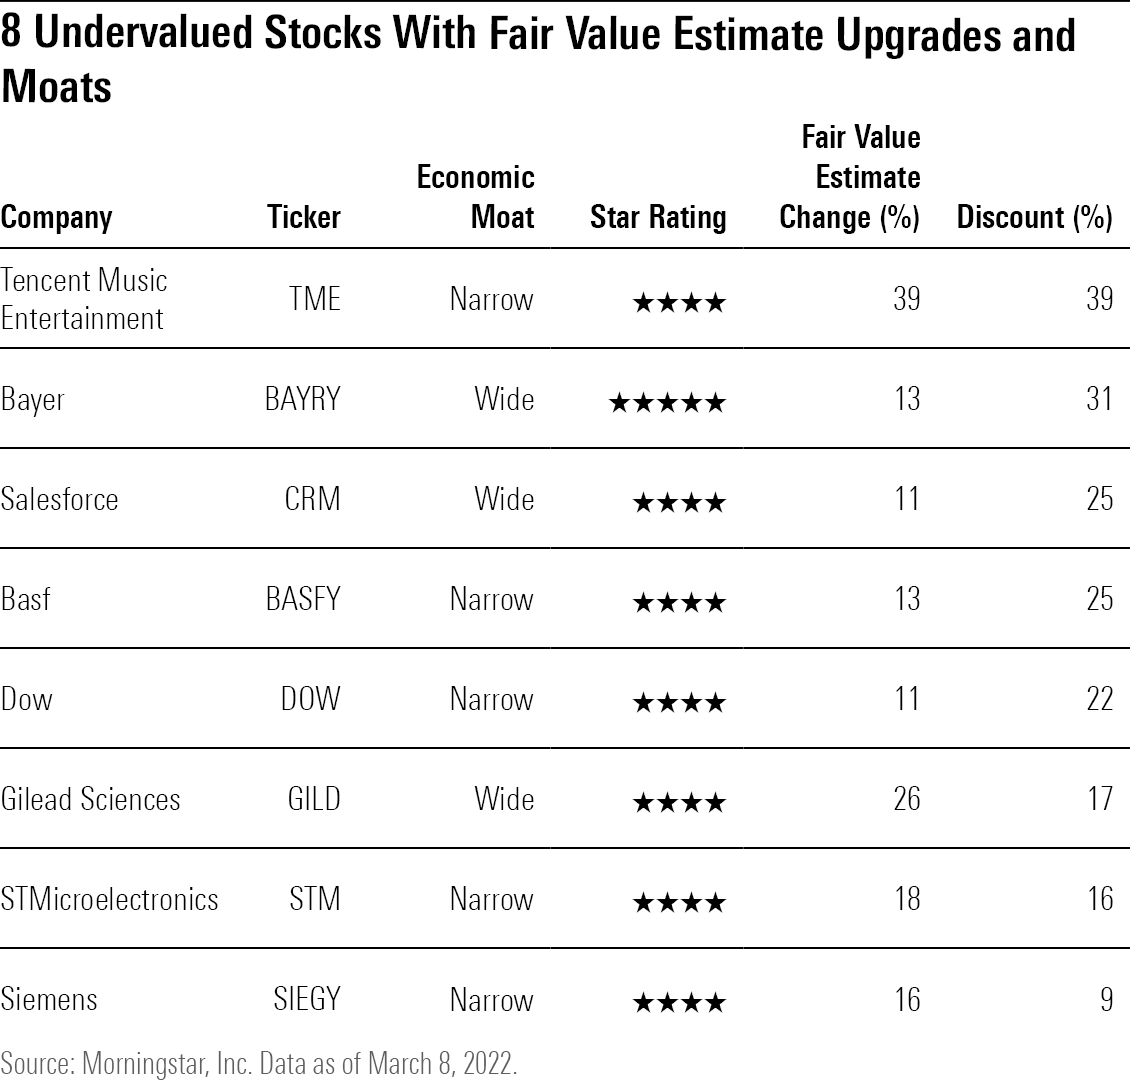 A table highlighting 8 undervalued stocks with recently upgraded Morningstar fair value estimates and economic moats.